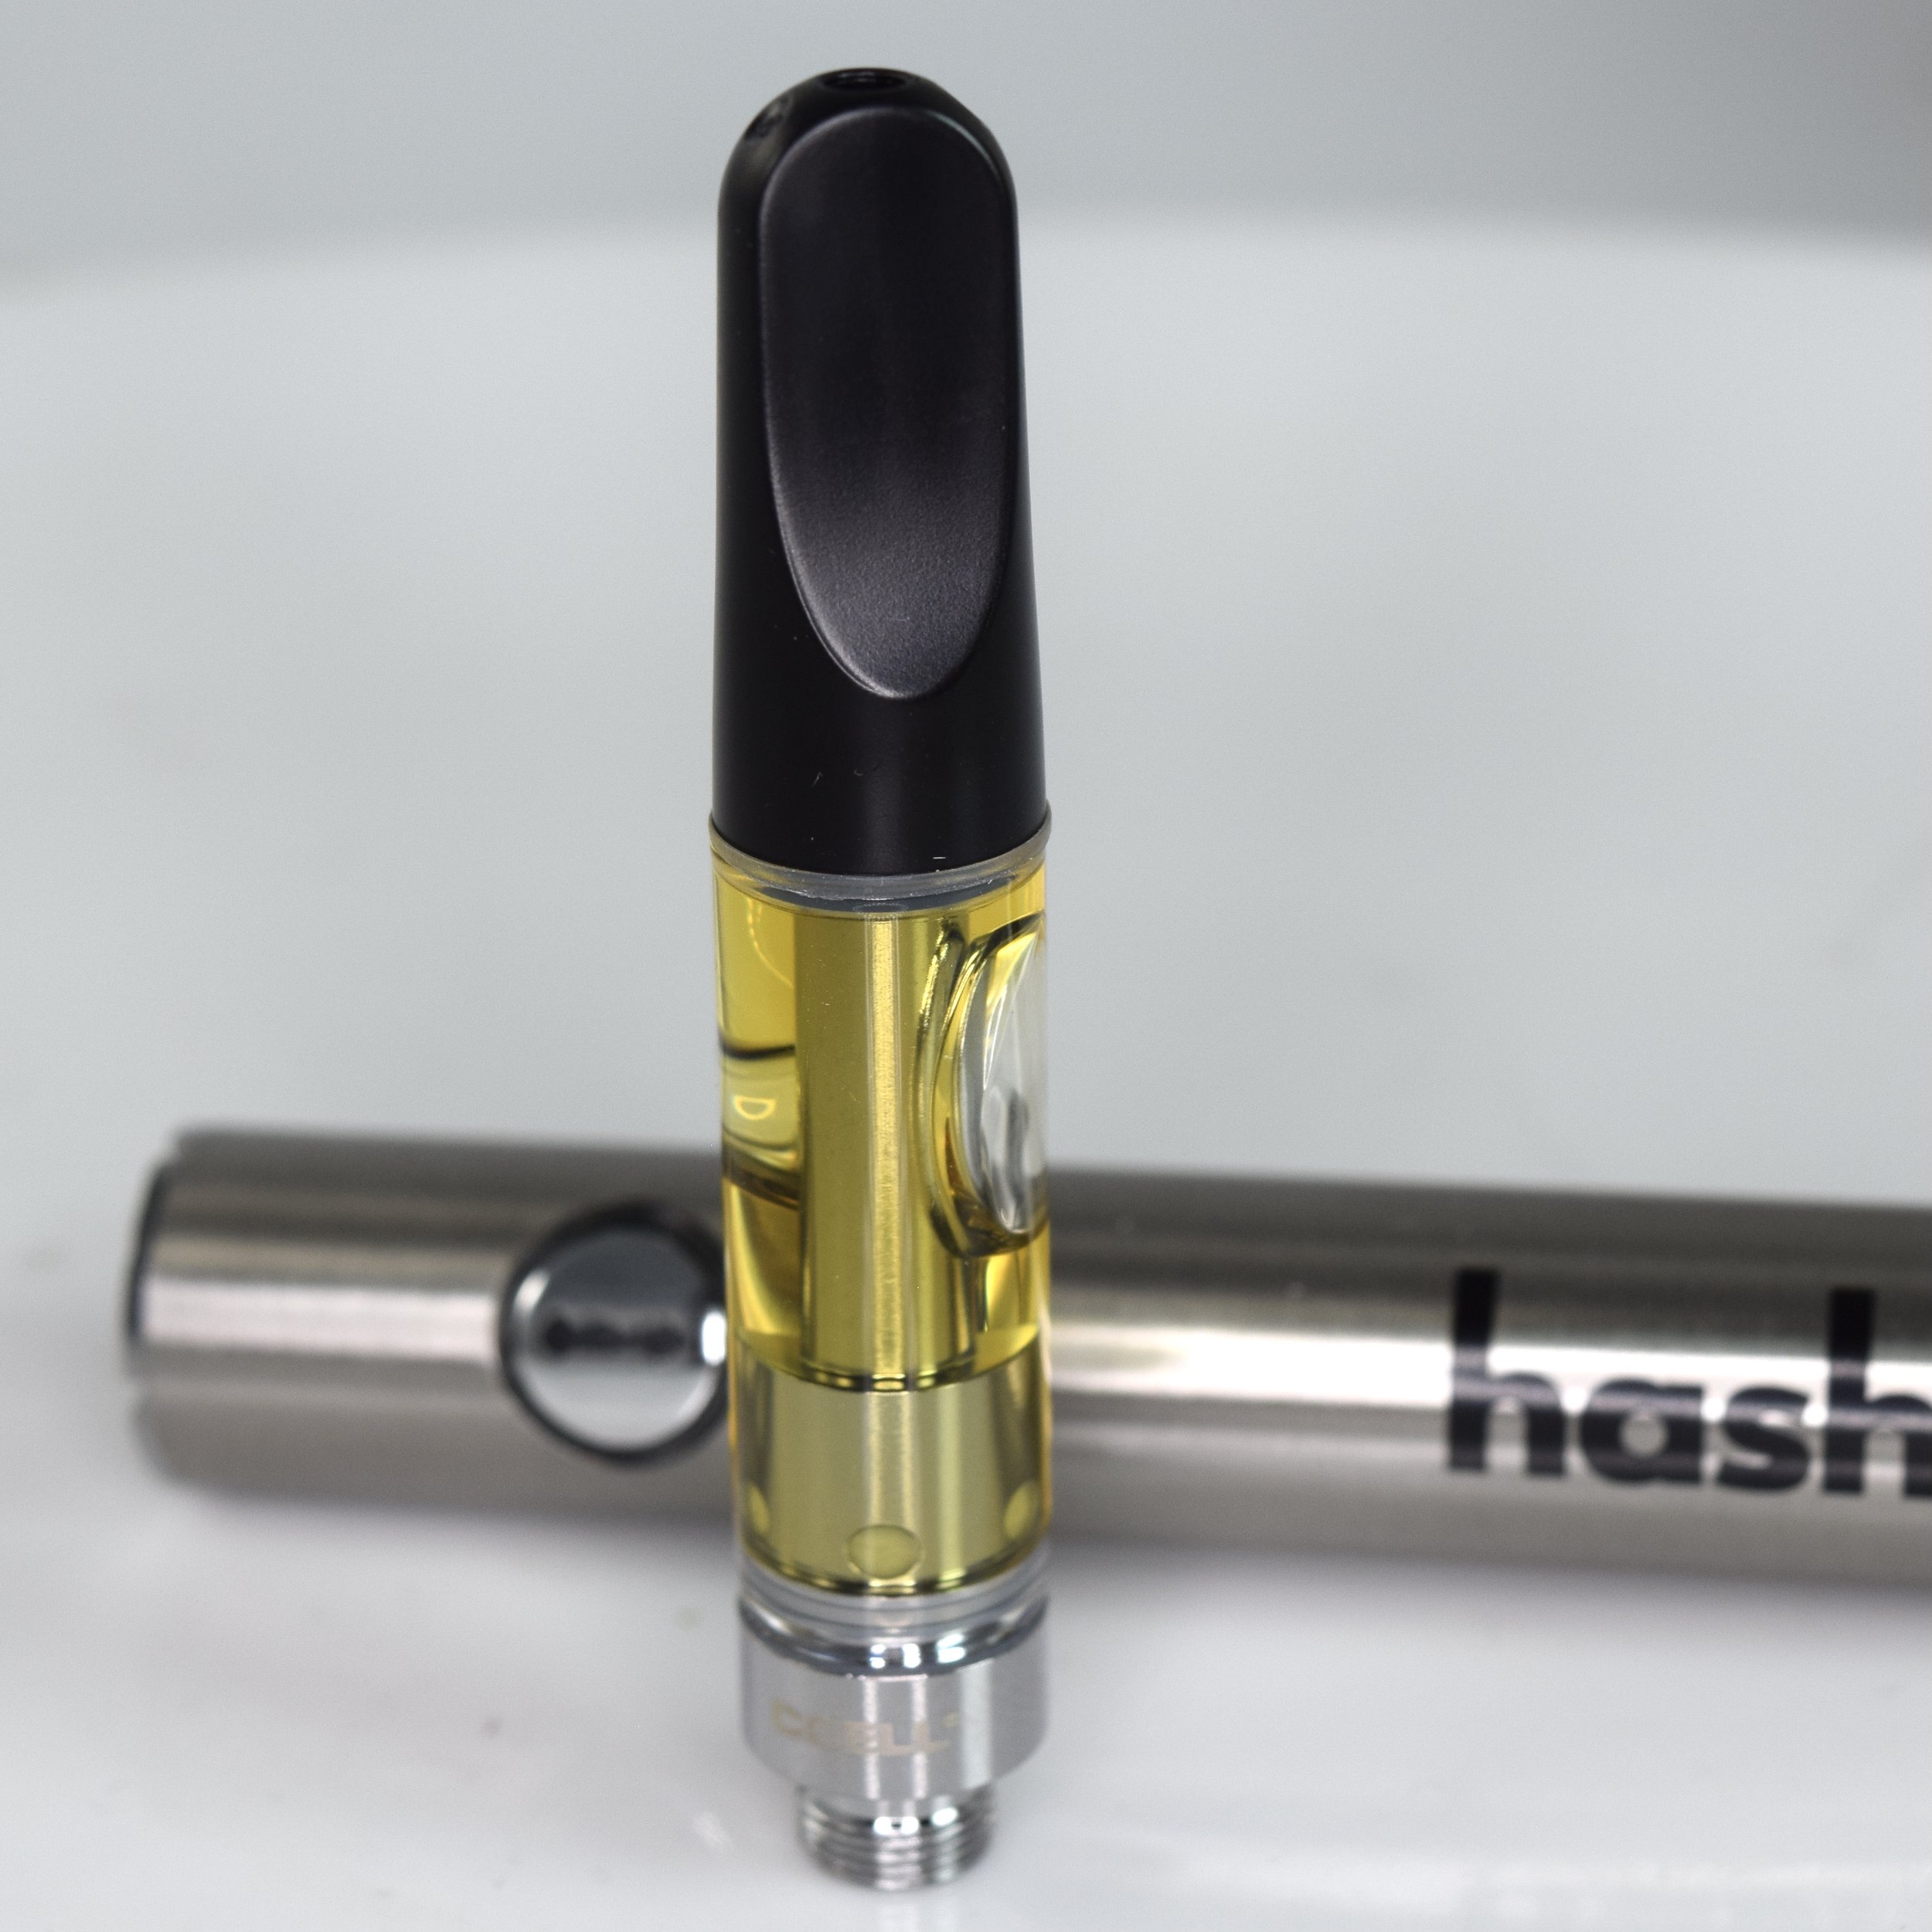 What Should I Consider Before Using THC Cartridges for Wellness Purposes?